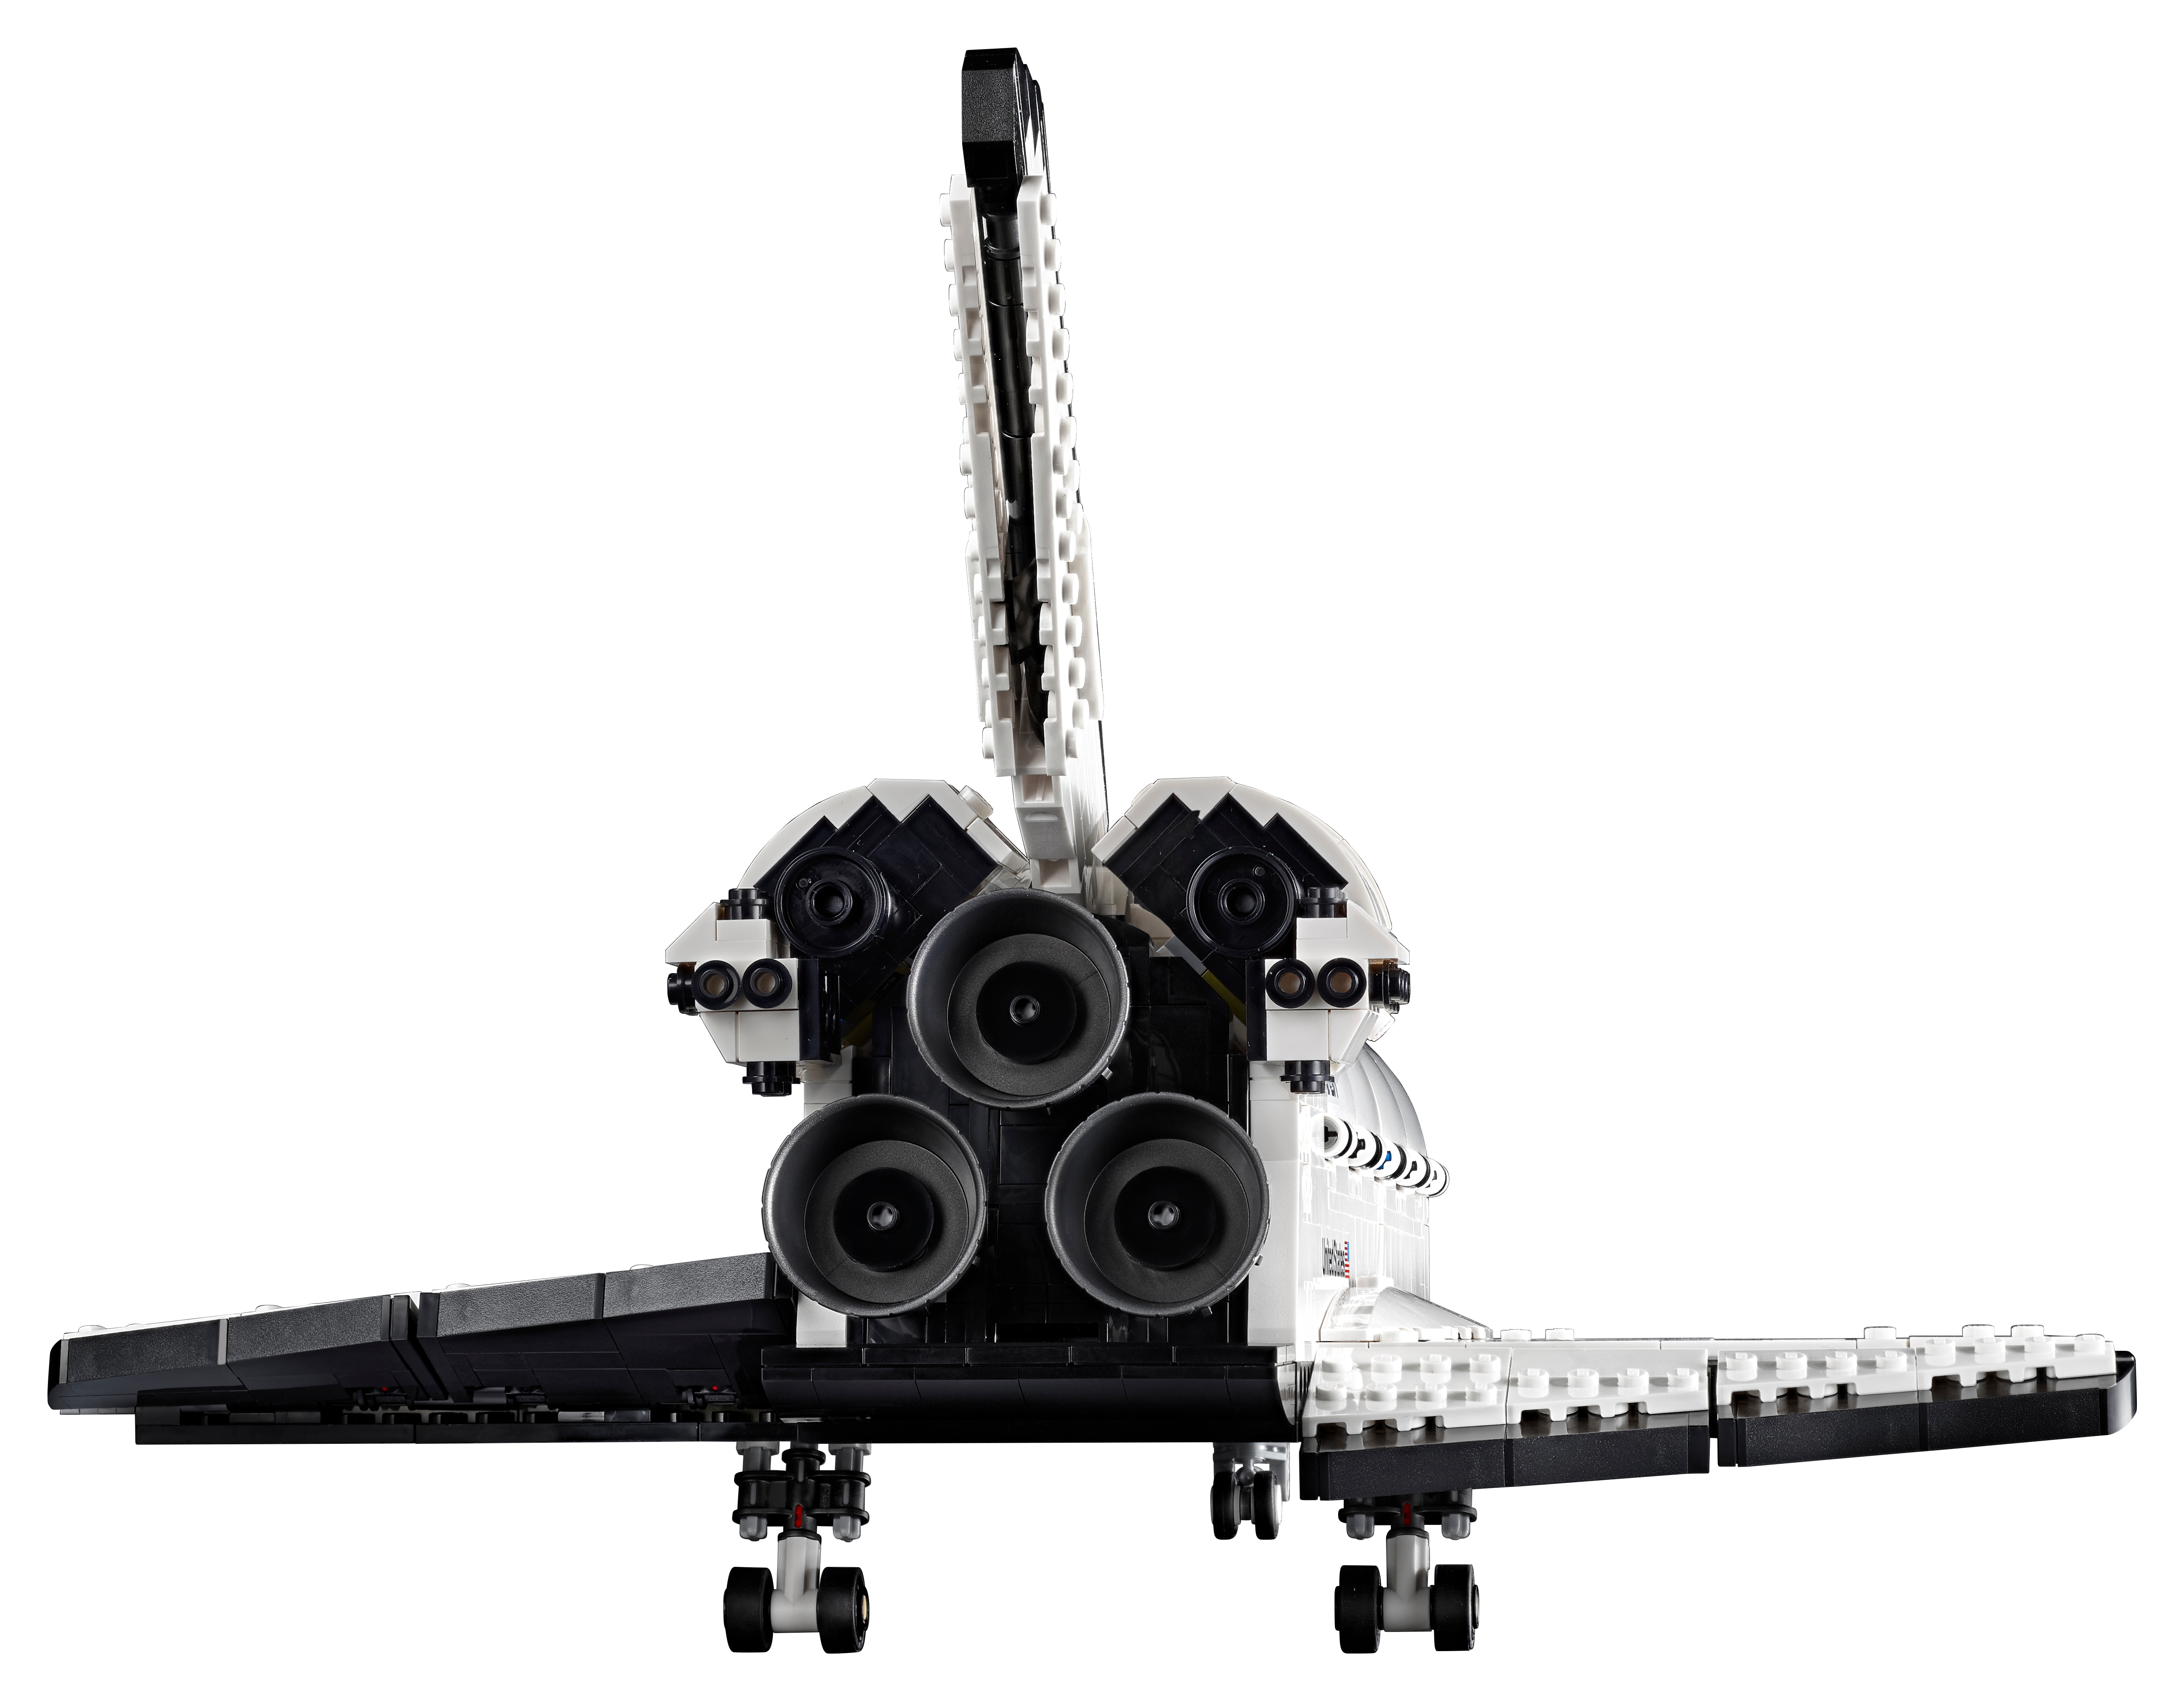 LEGO Space Shuttle Discovery debuts as new 2,300-piece set - 9to5Toys